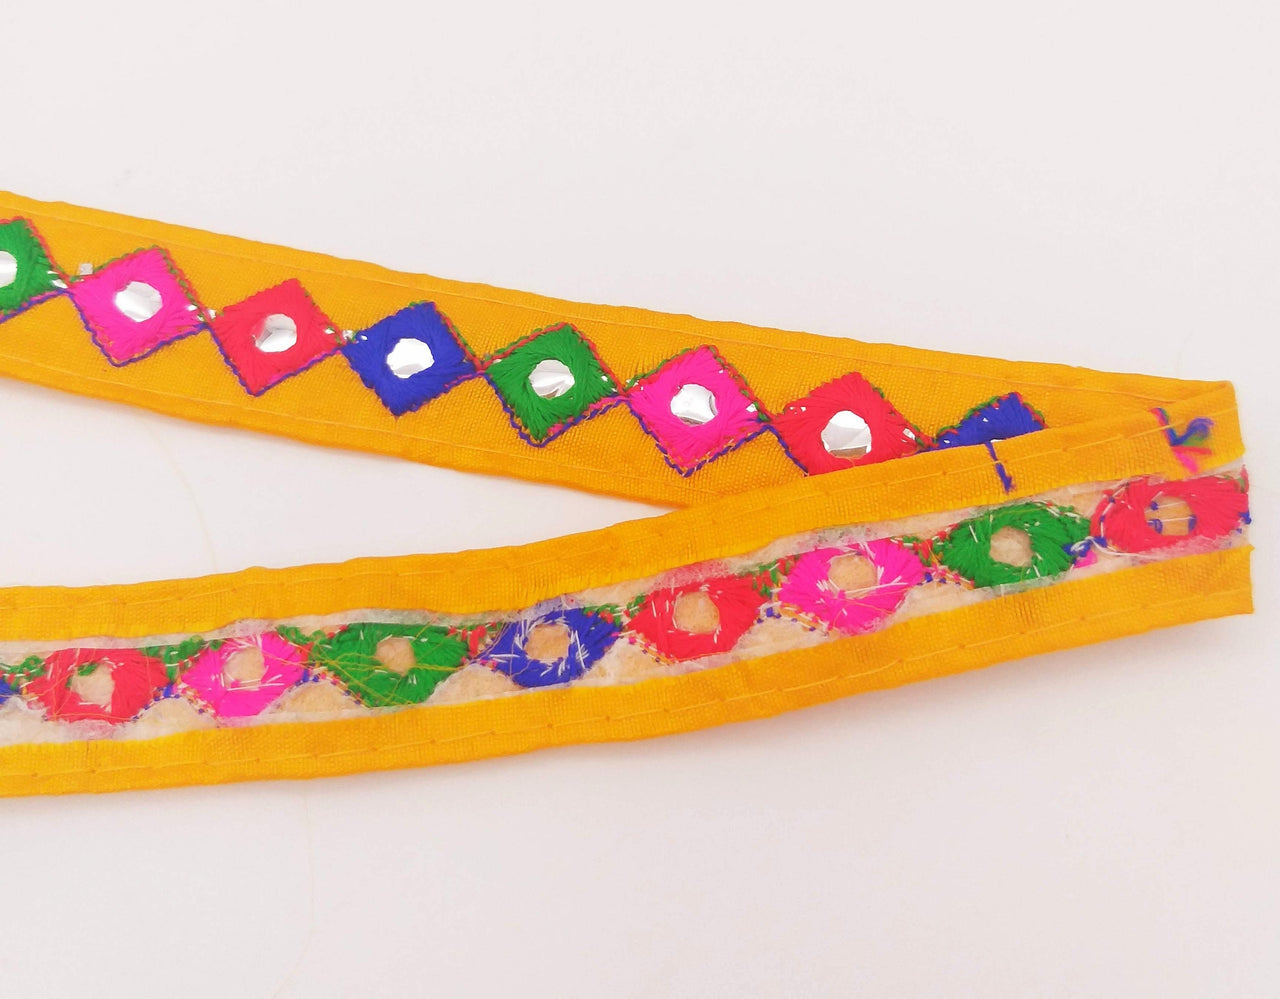 Wholesale Yellow Cotton Fabric Mirrored Trim With Embroidery In Fuchsia Pink, Blue, Red & Green Threads